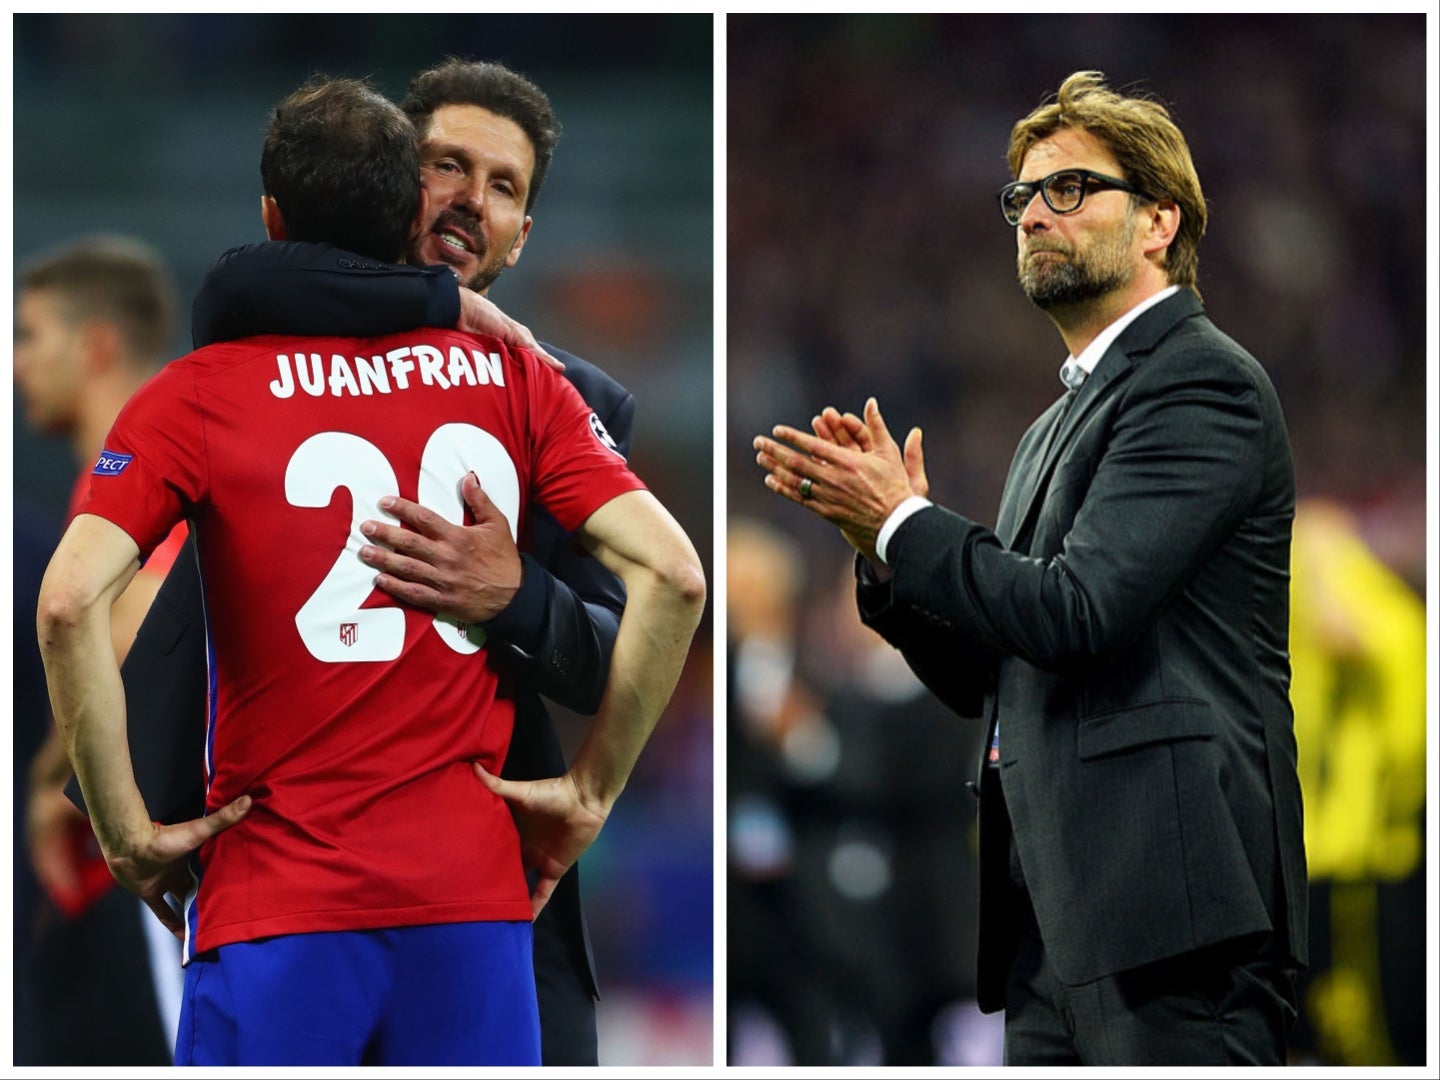 Simeone and Klopp had extraordinary success with Atletico and Dortmund but suffered heartbreaking defeats in the Champions League finals that would have capped their achievements